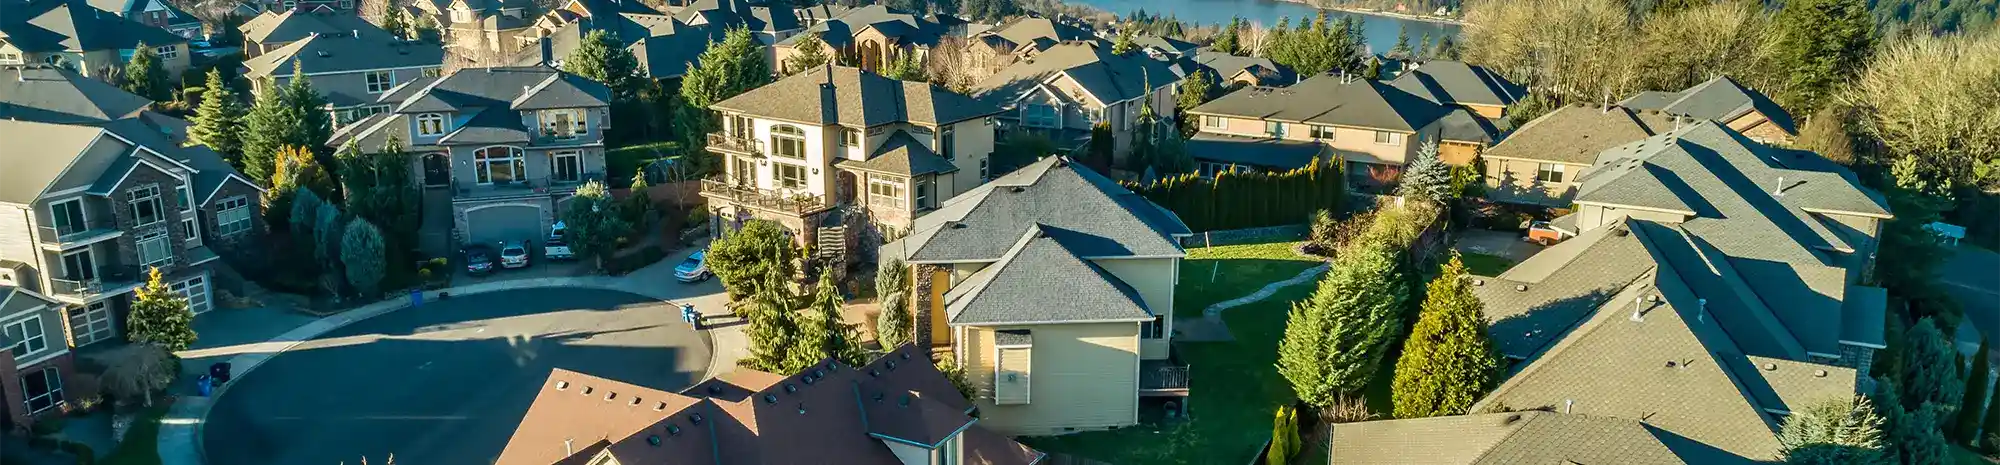 Overview of suburban houses in the pacific northwest | American Mastercraft